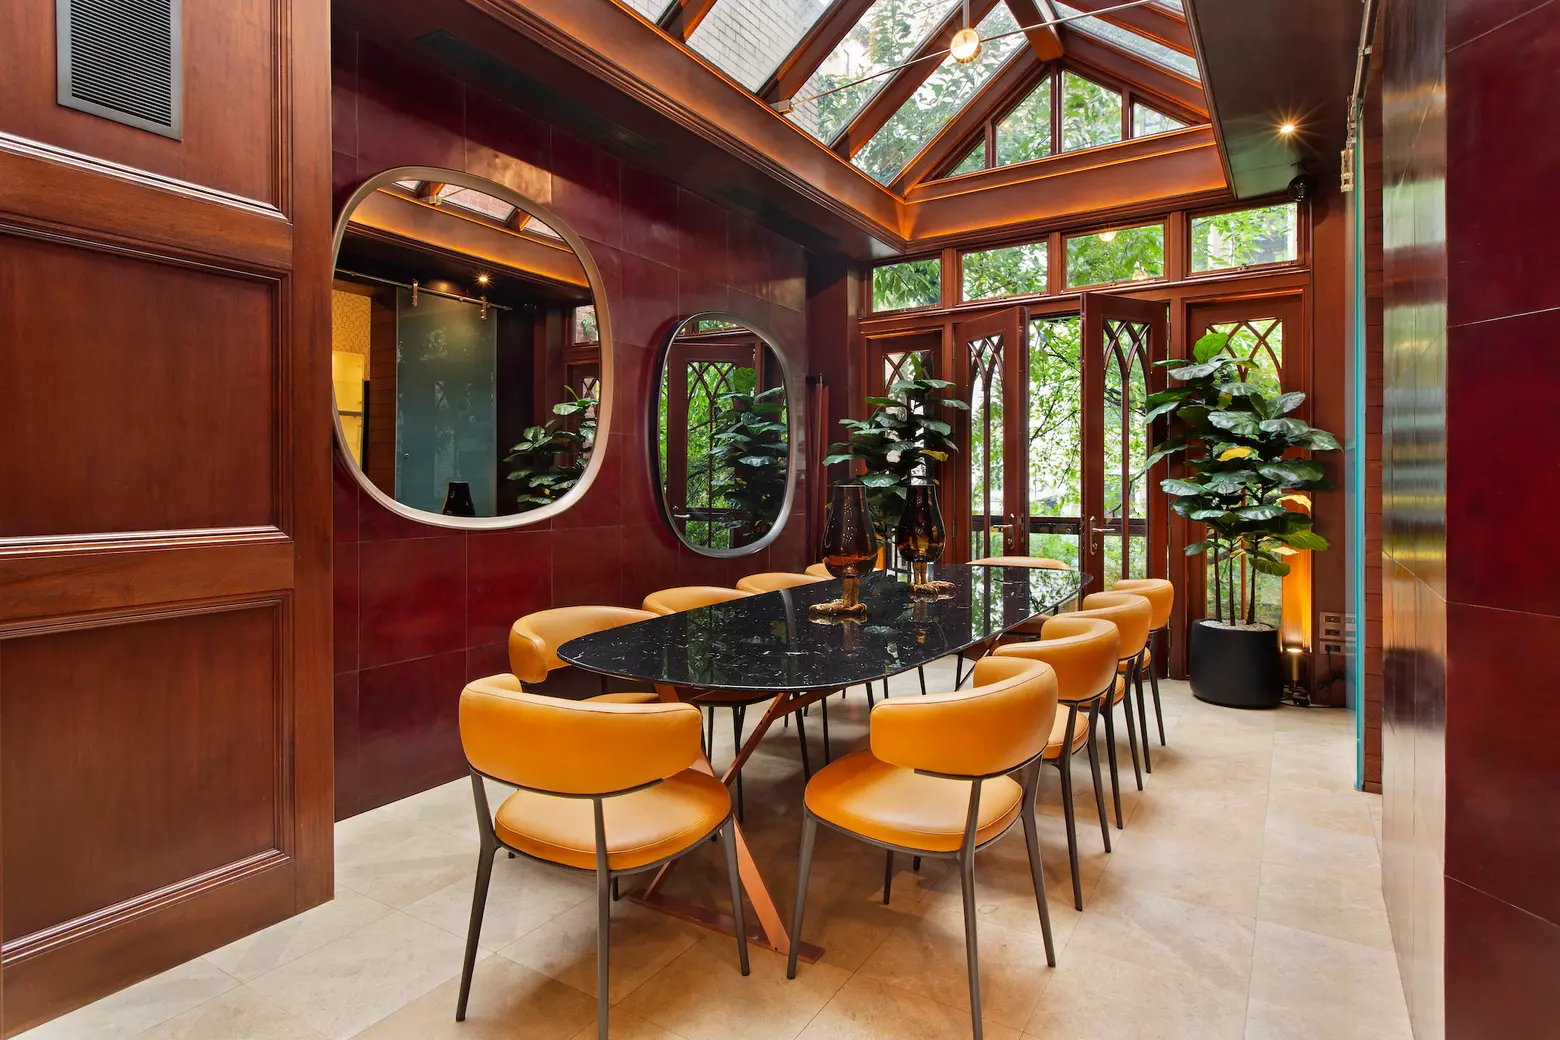 $22M Upper East Side townhouse has a teak media room, mid-century solarium, and neon accents